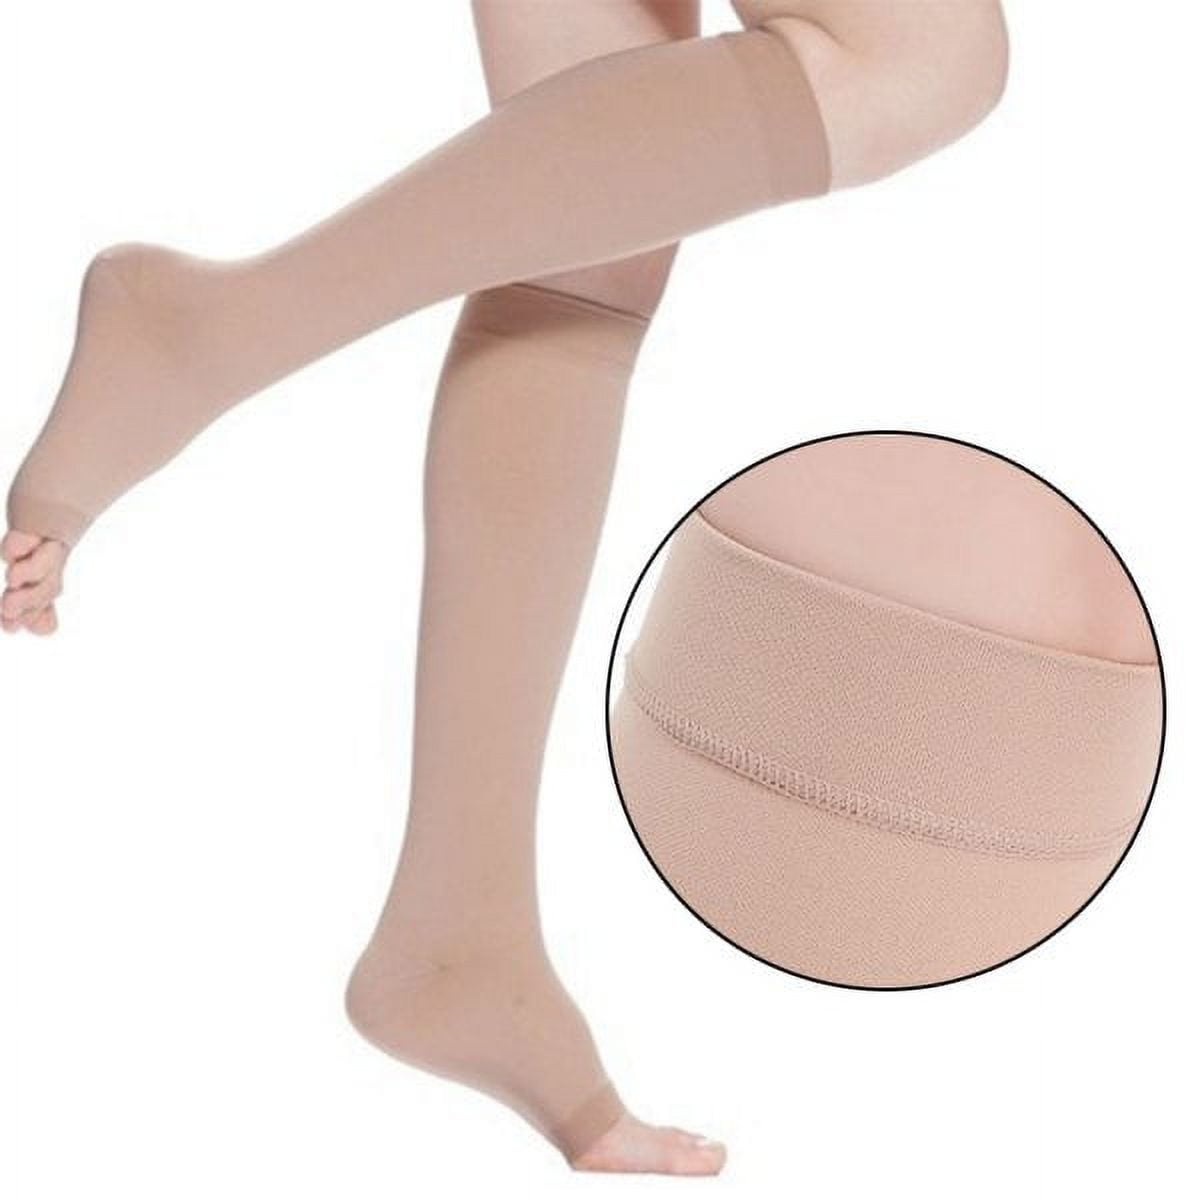 Medical Compression Socks with Open Toe - Best Support Zipper Stocking for  Men Women Varicose Veins, Edema, Swollen or Sore Legs 18-21 mm Hg (S/M,  Nude) 